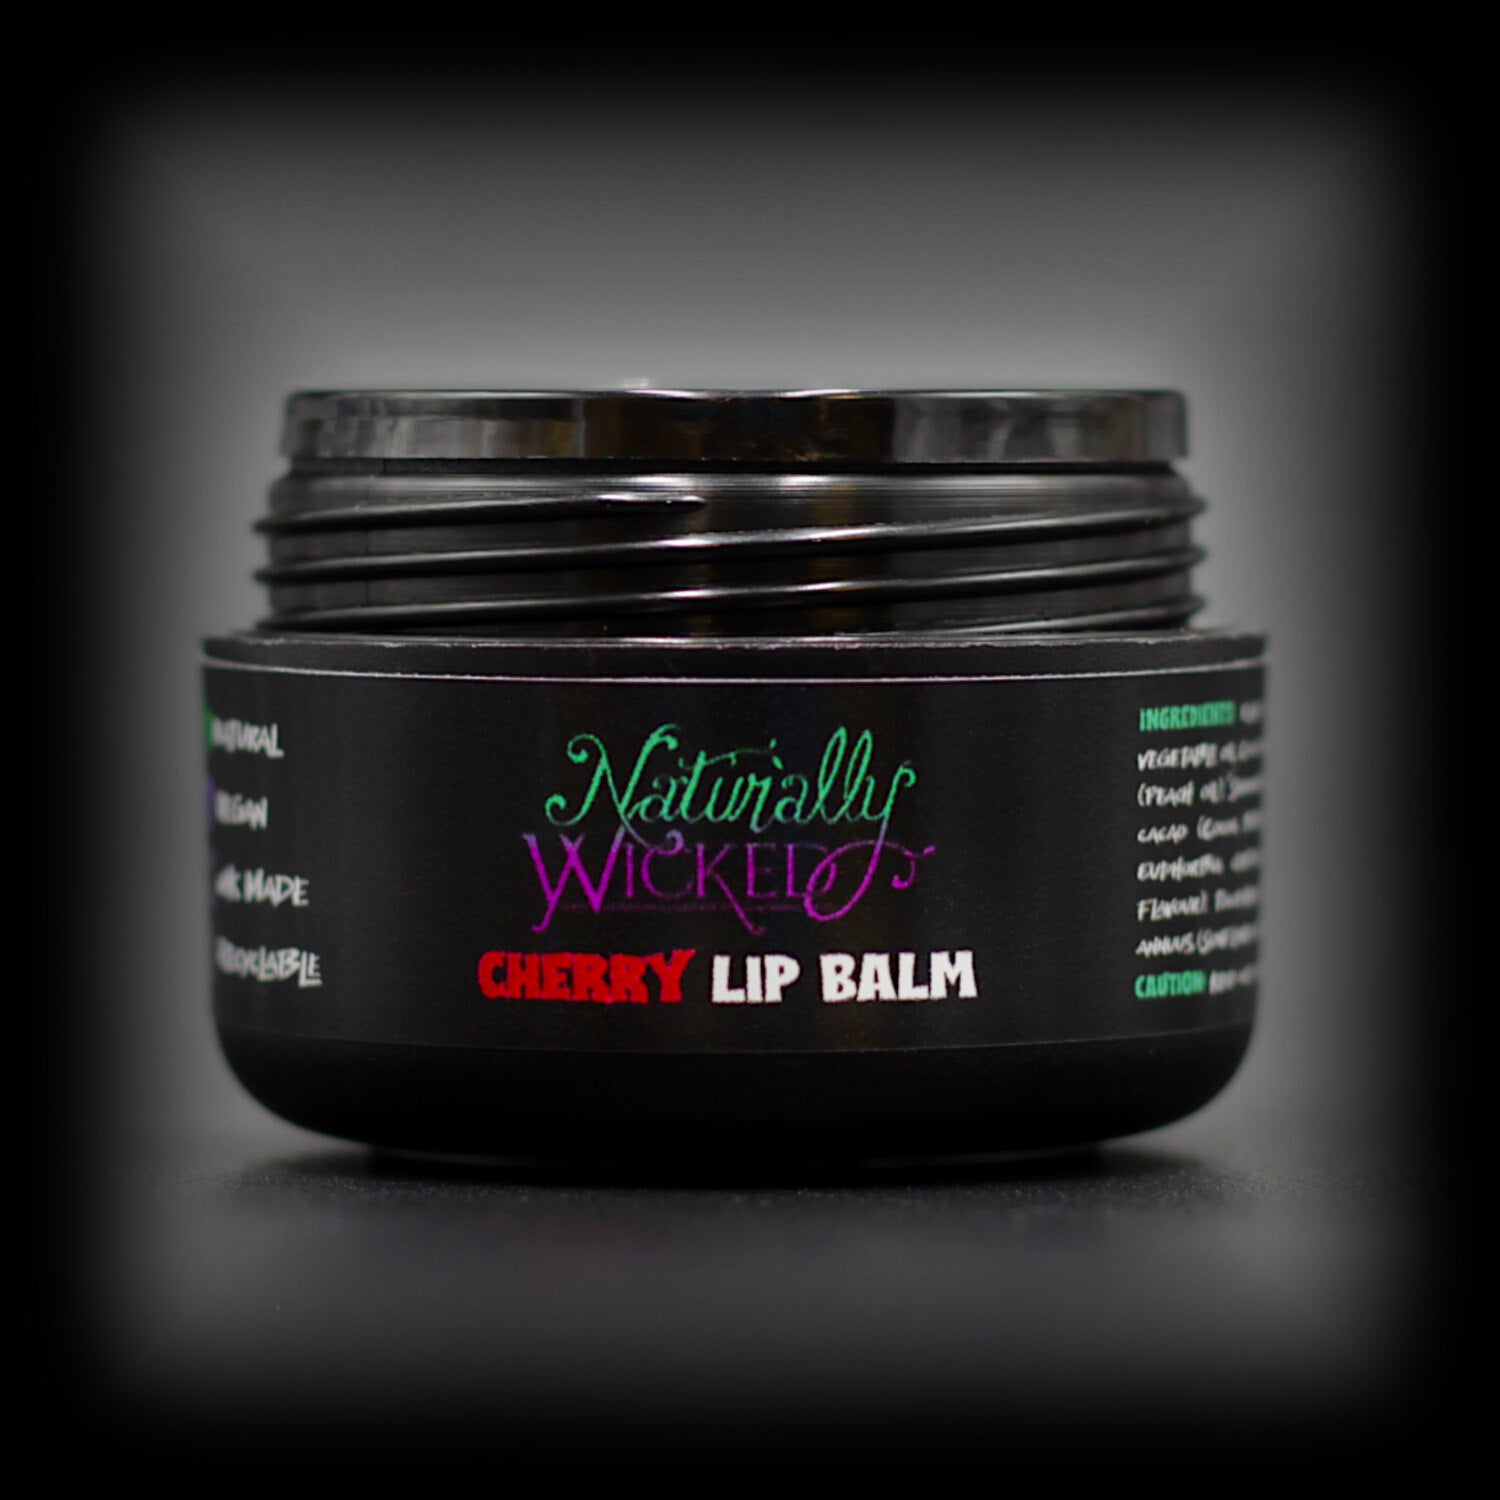 Naturally Wicked Cherry Lip Balm With Lid Removed & Luxury Inner Seal Exposed